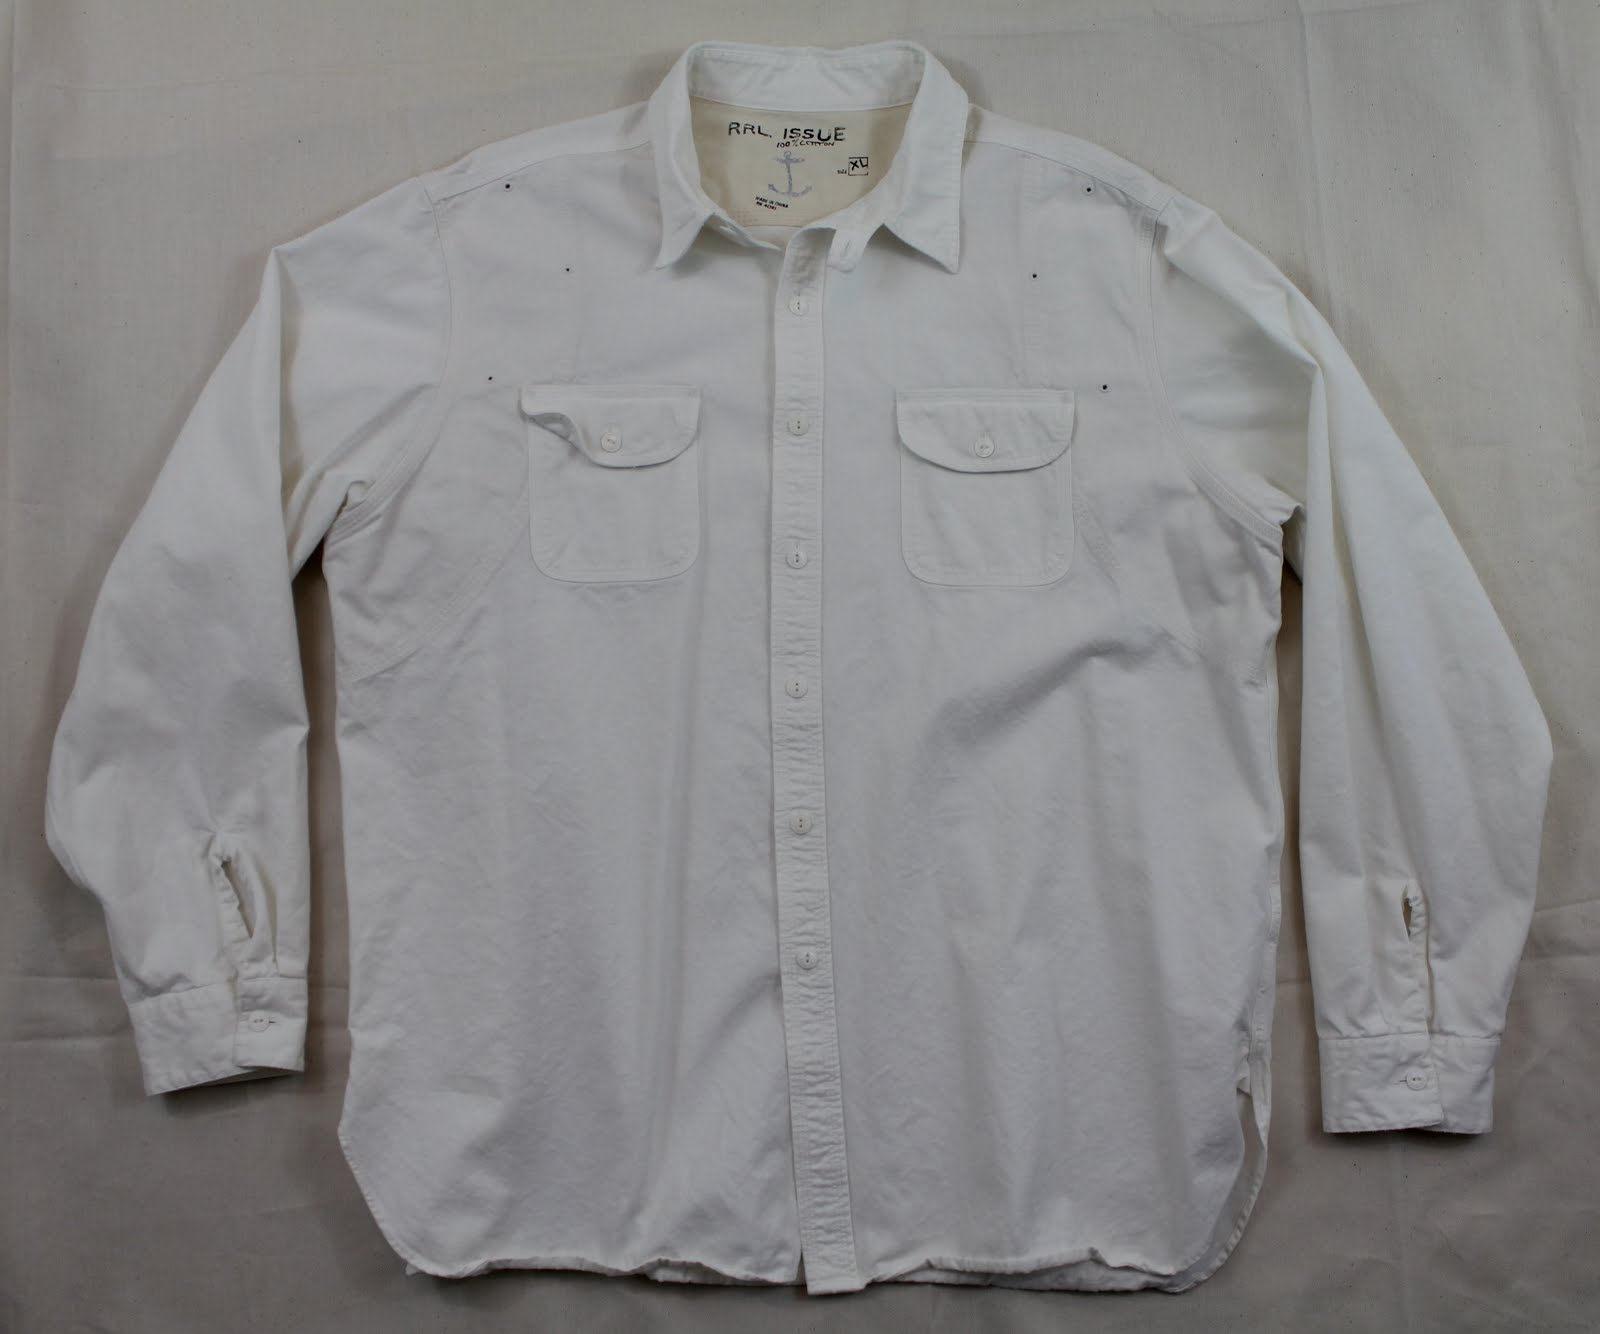 vintage workwear: Vent Hole Work Shirts…Part Two: Sugar Cane & Double RL